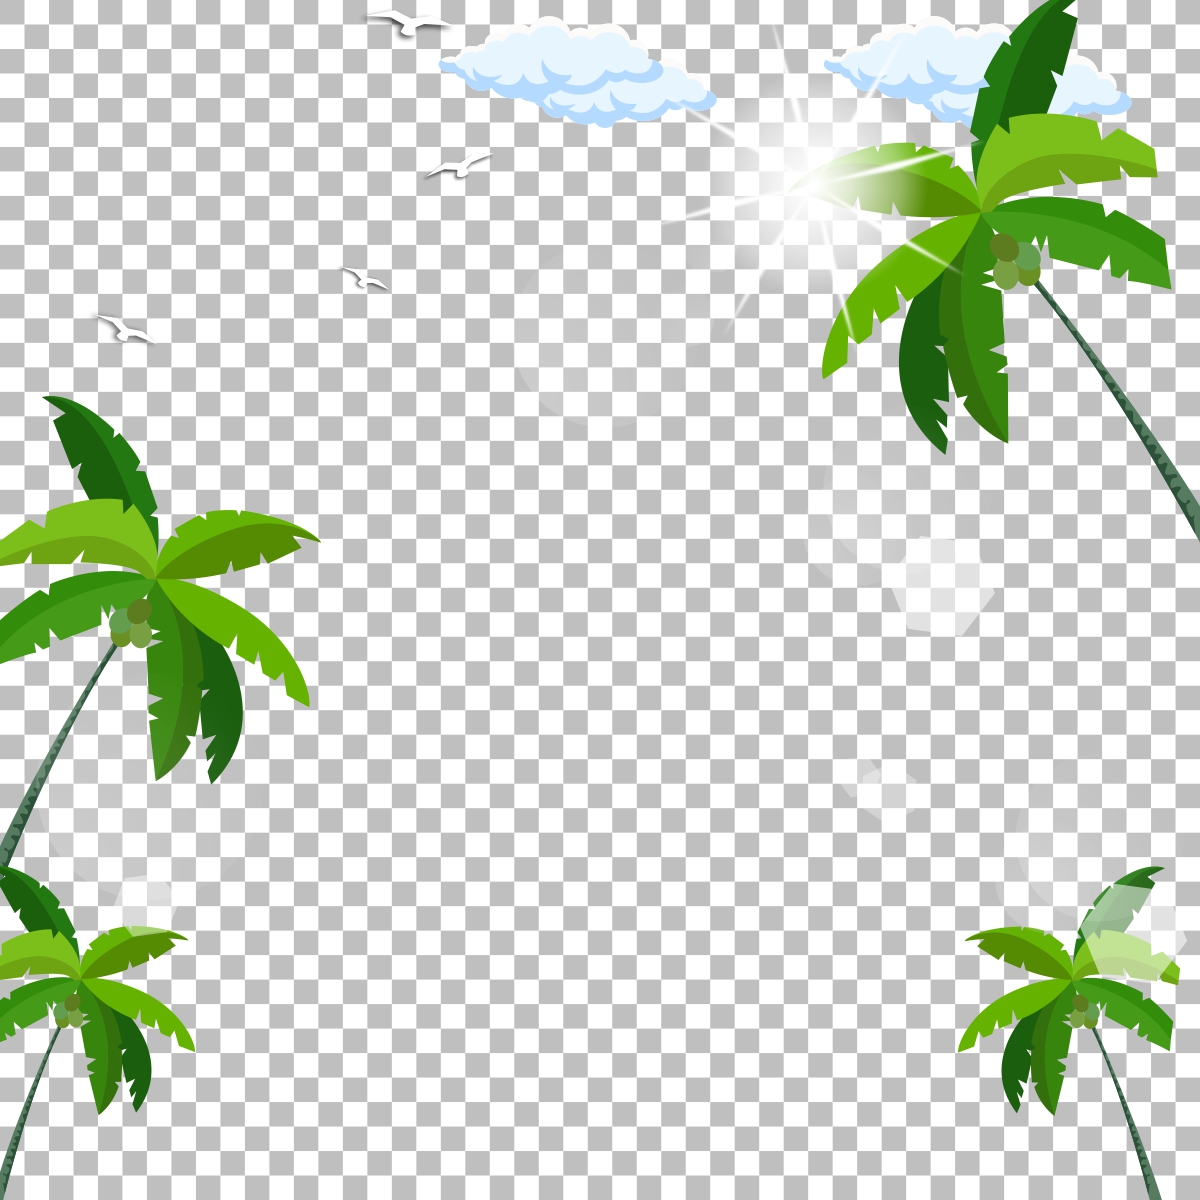 Vector the coconut trees on the beach in PNG download for free